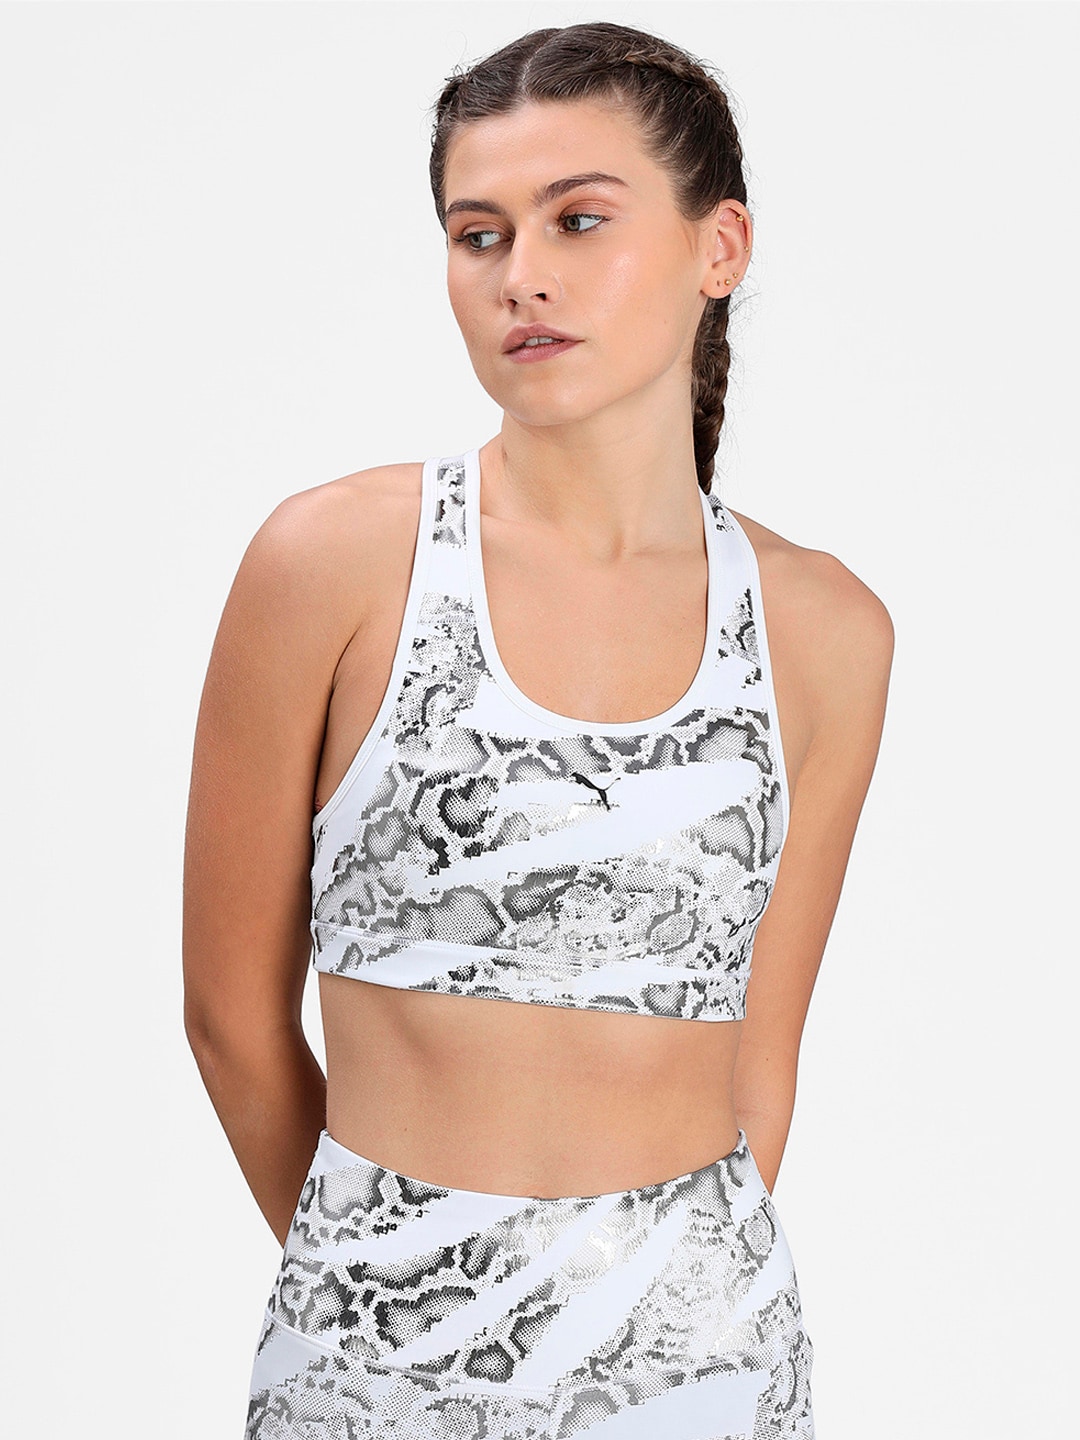 Puma White & Charcoal Grey Printed Mid 4Keeps Graphic Training Sports Bra 52030602 Price in India